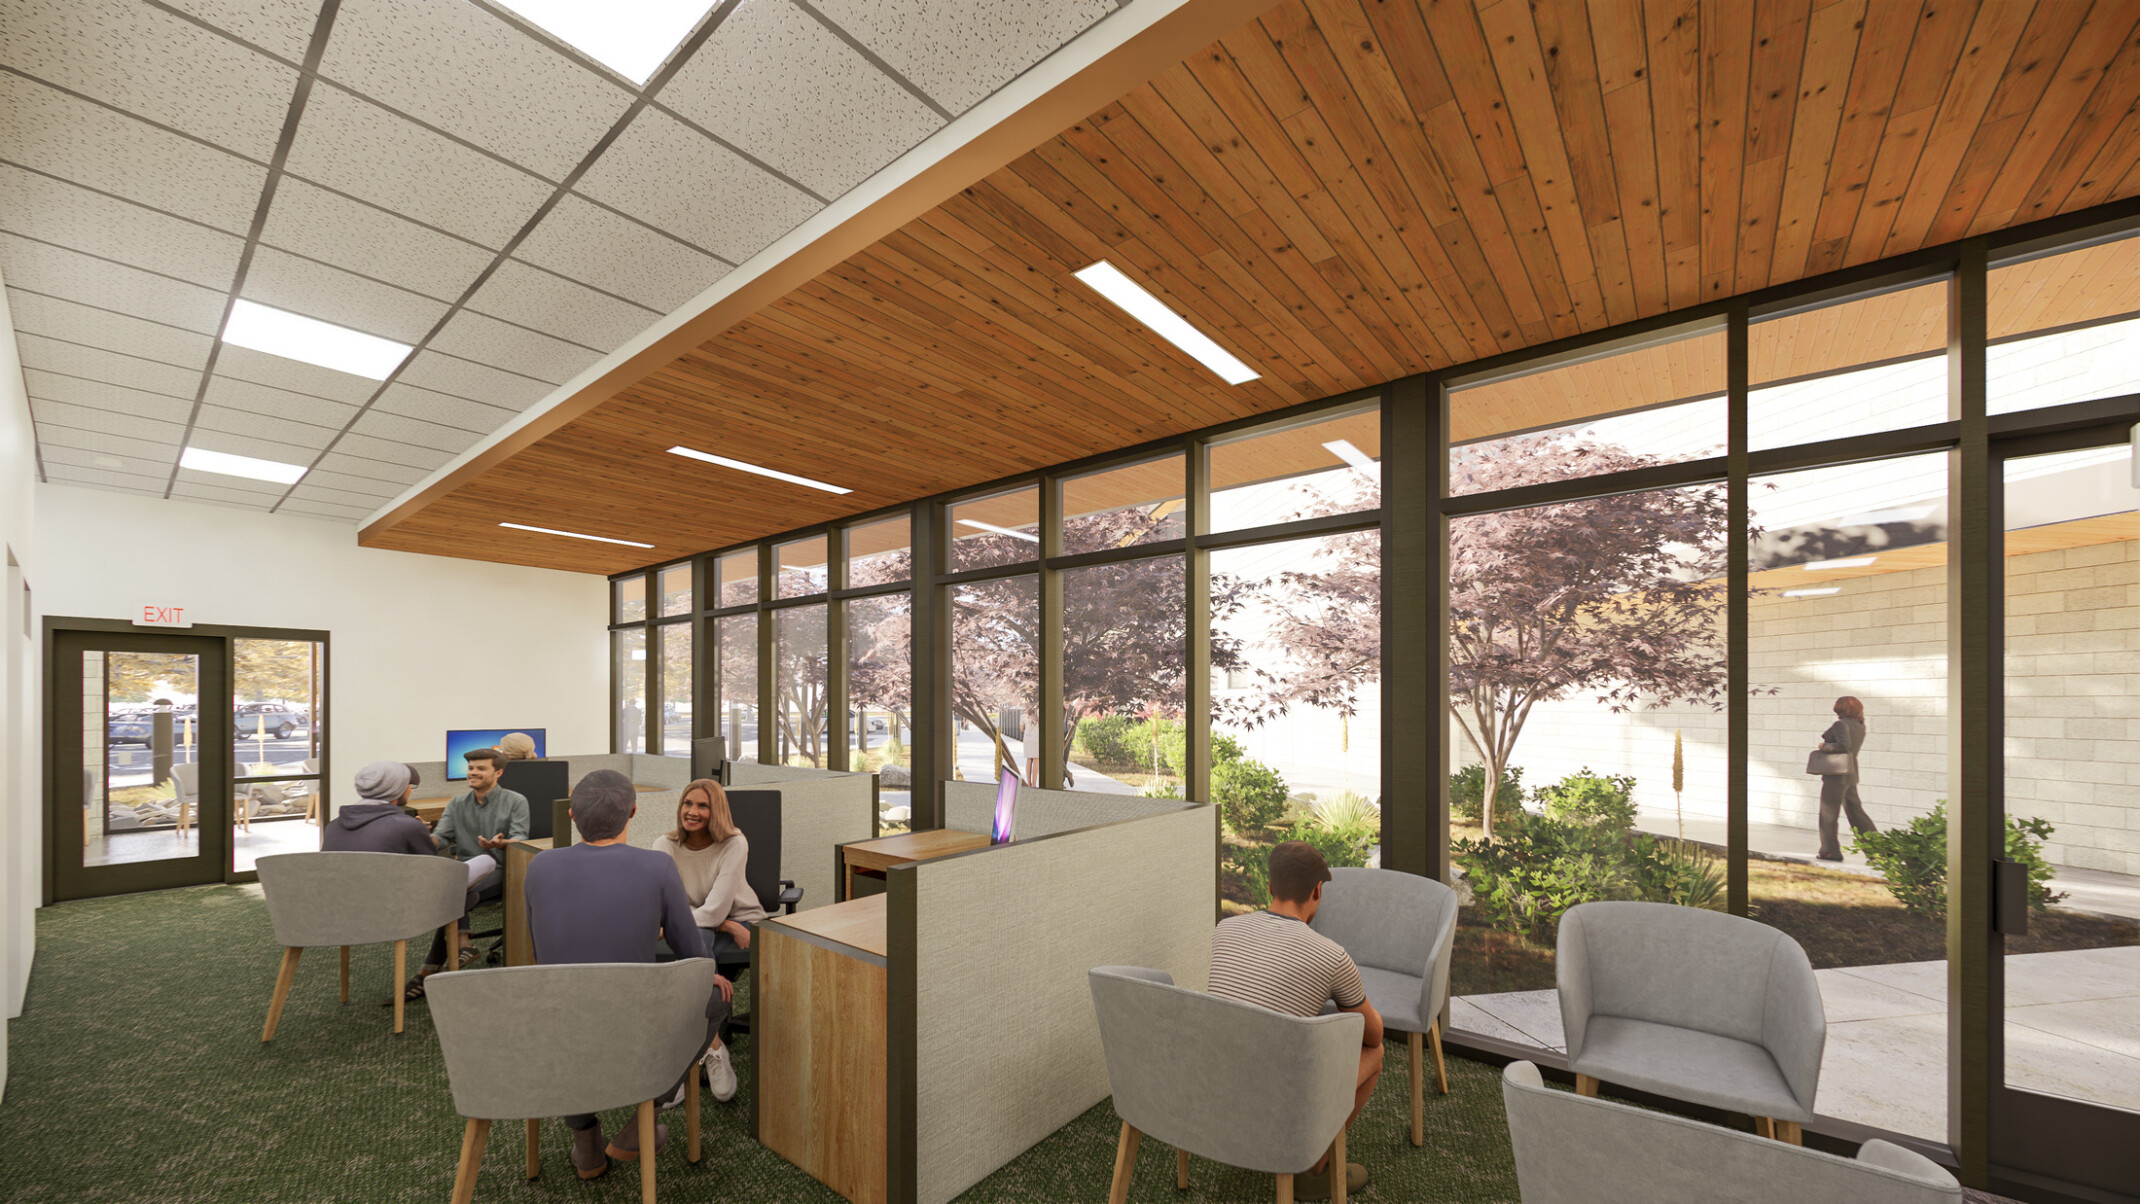 Release area of Yavapai County Criminal Justice Center. Seating areas in the front, natural materials, floor to ceiling windows, wood panel accent, daylighting throughout